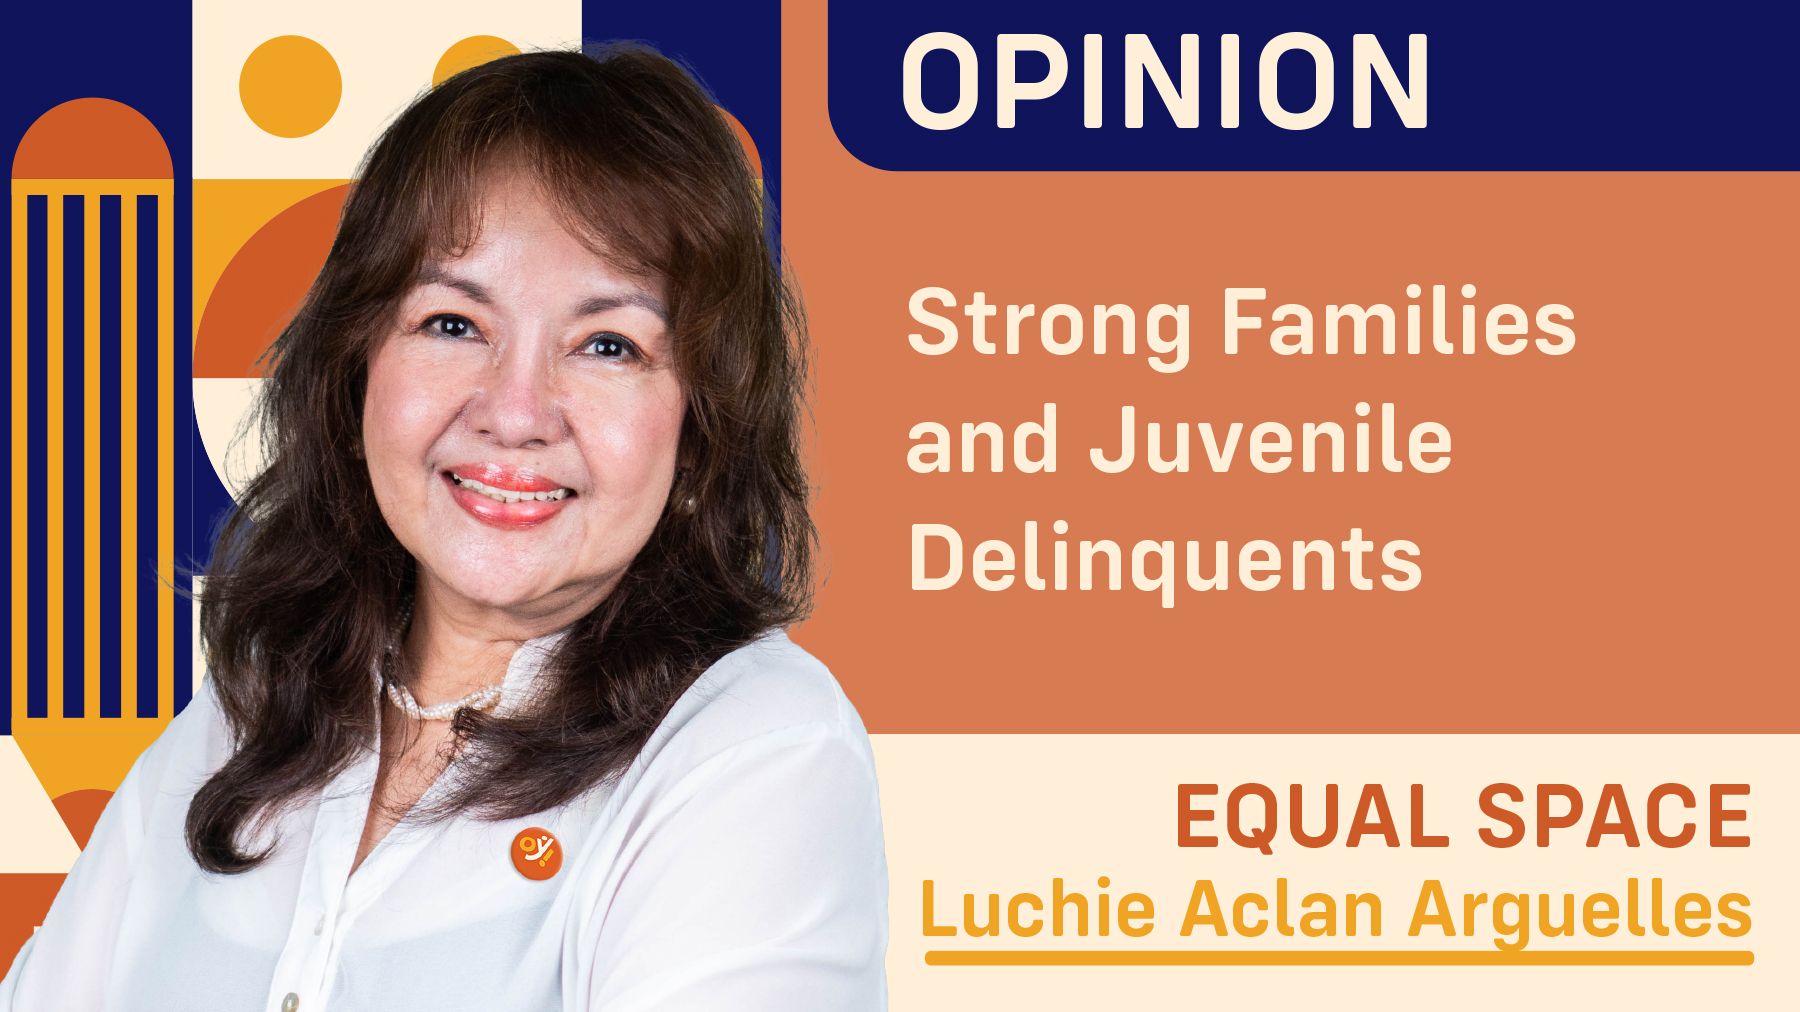 Strong Families and Juvenile Delinquents